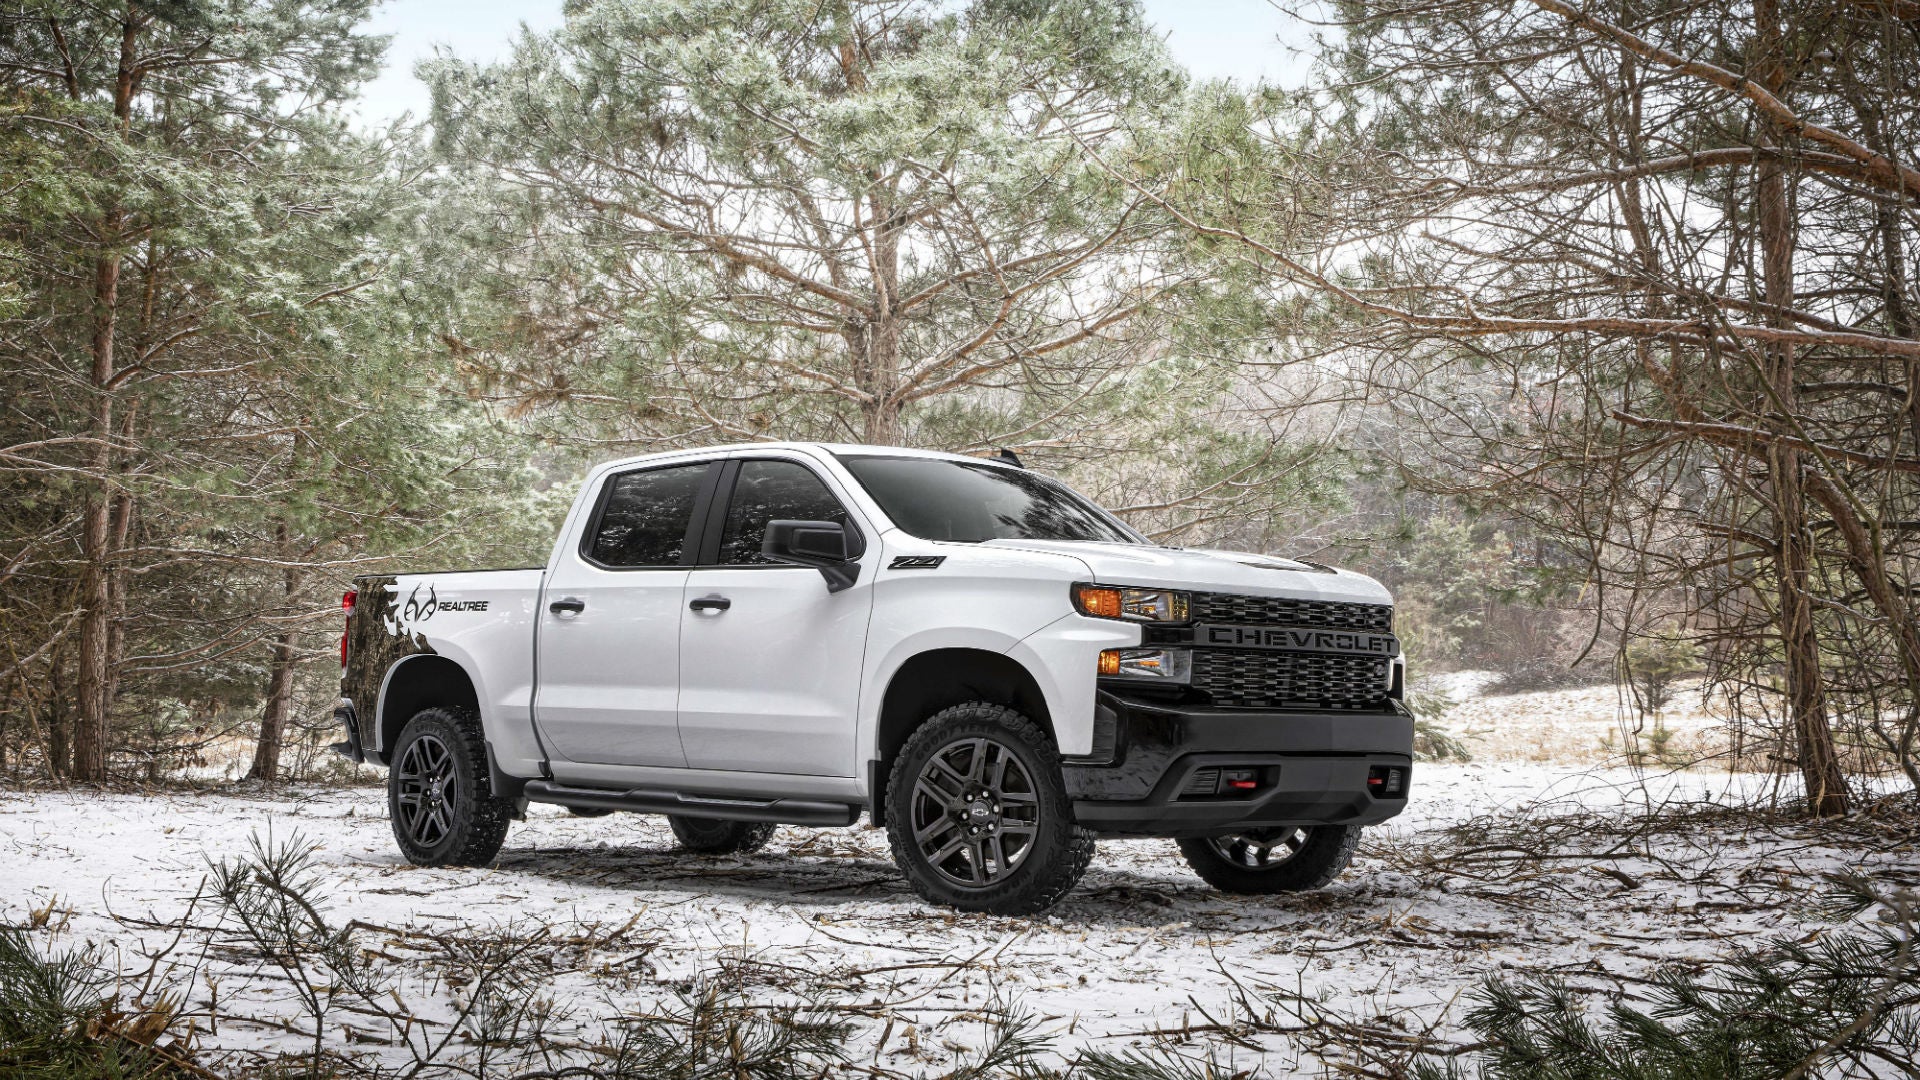 The 2021 Chevy Silverado Realtree Edition in the woods